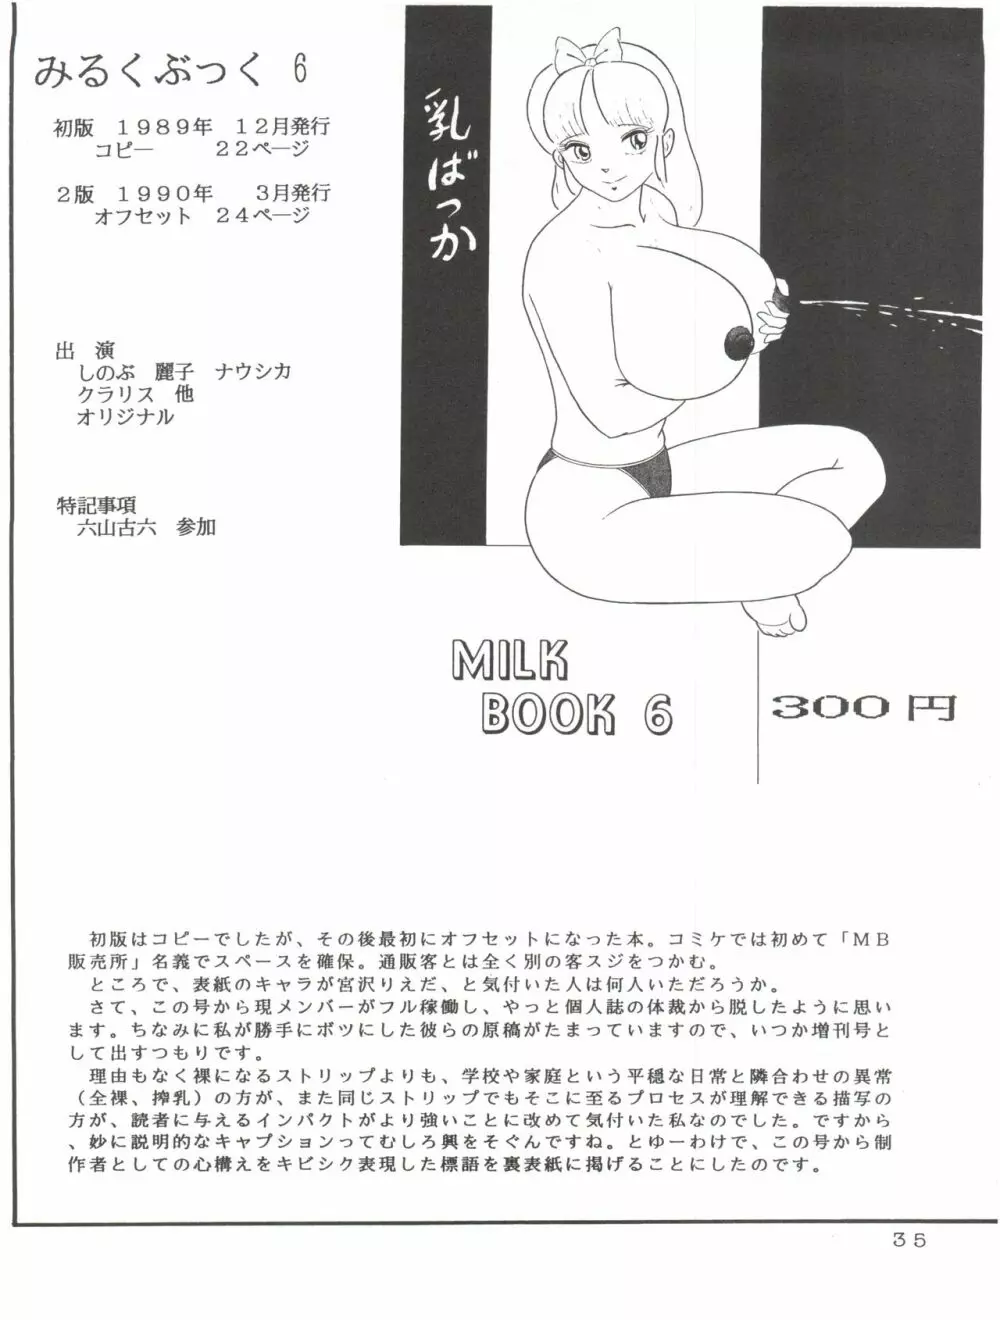 Milk Book Collections 1986-1990 35ページ